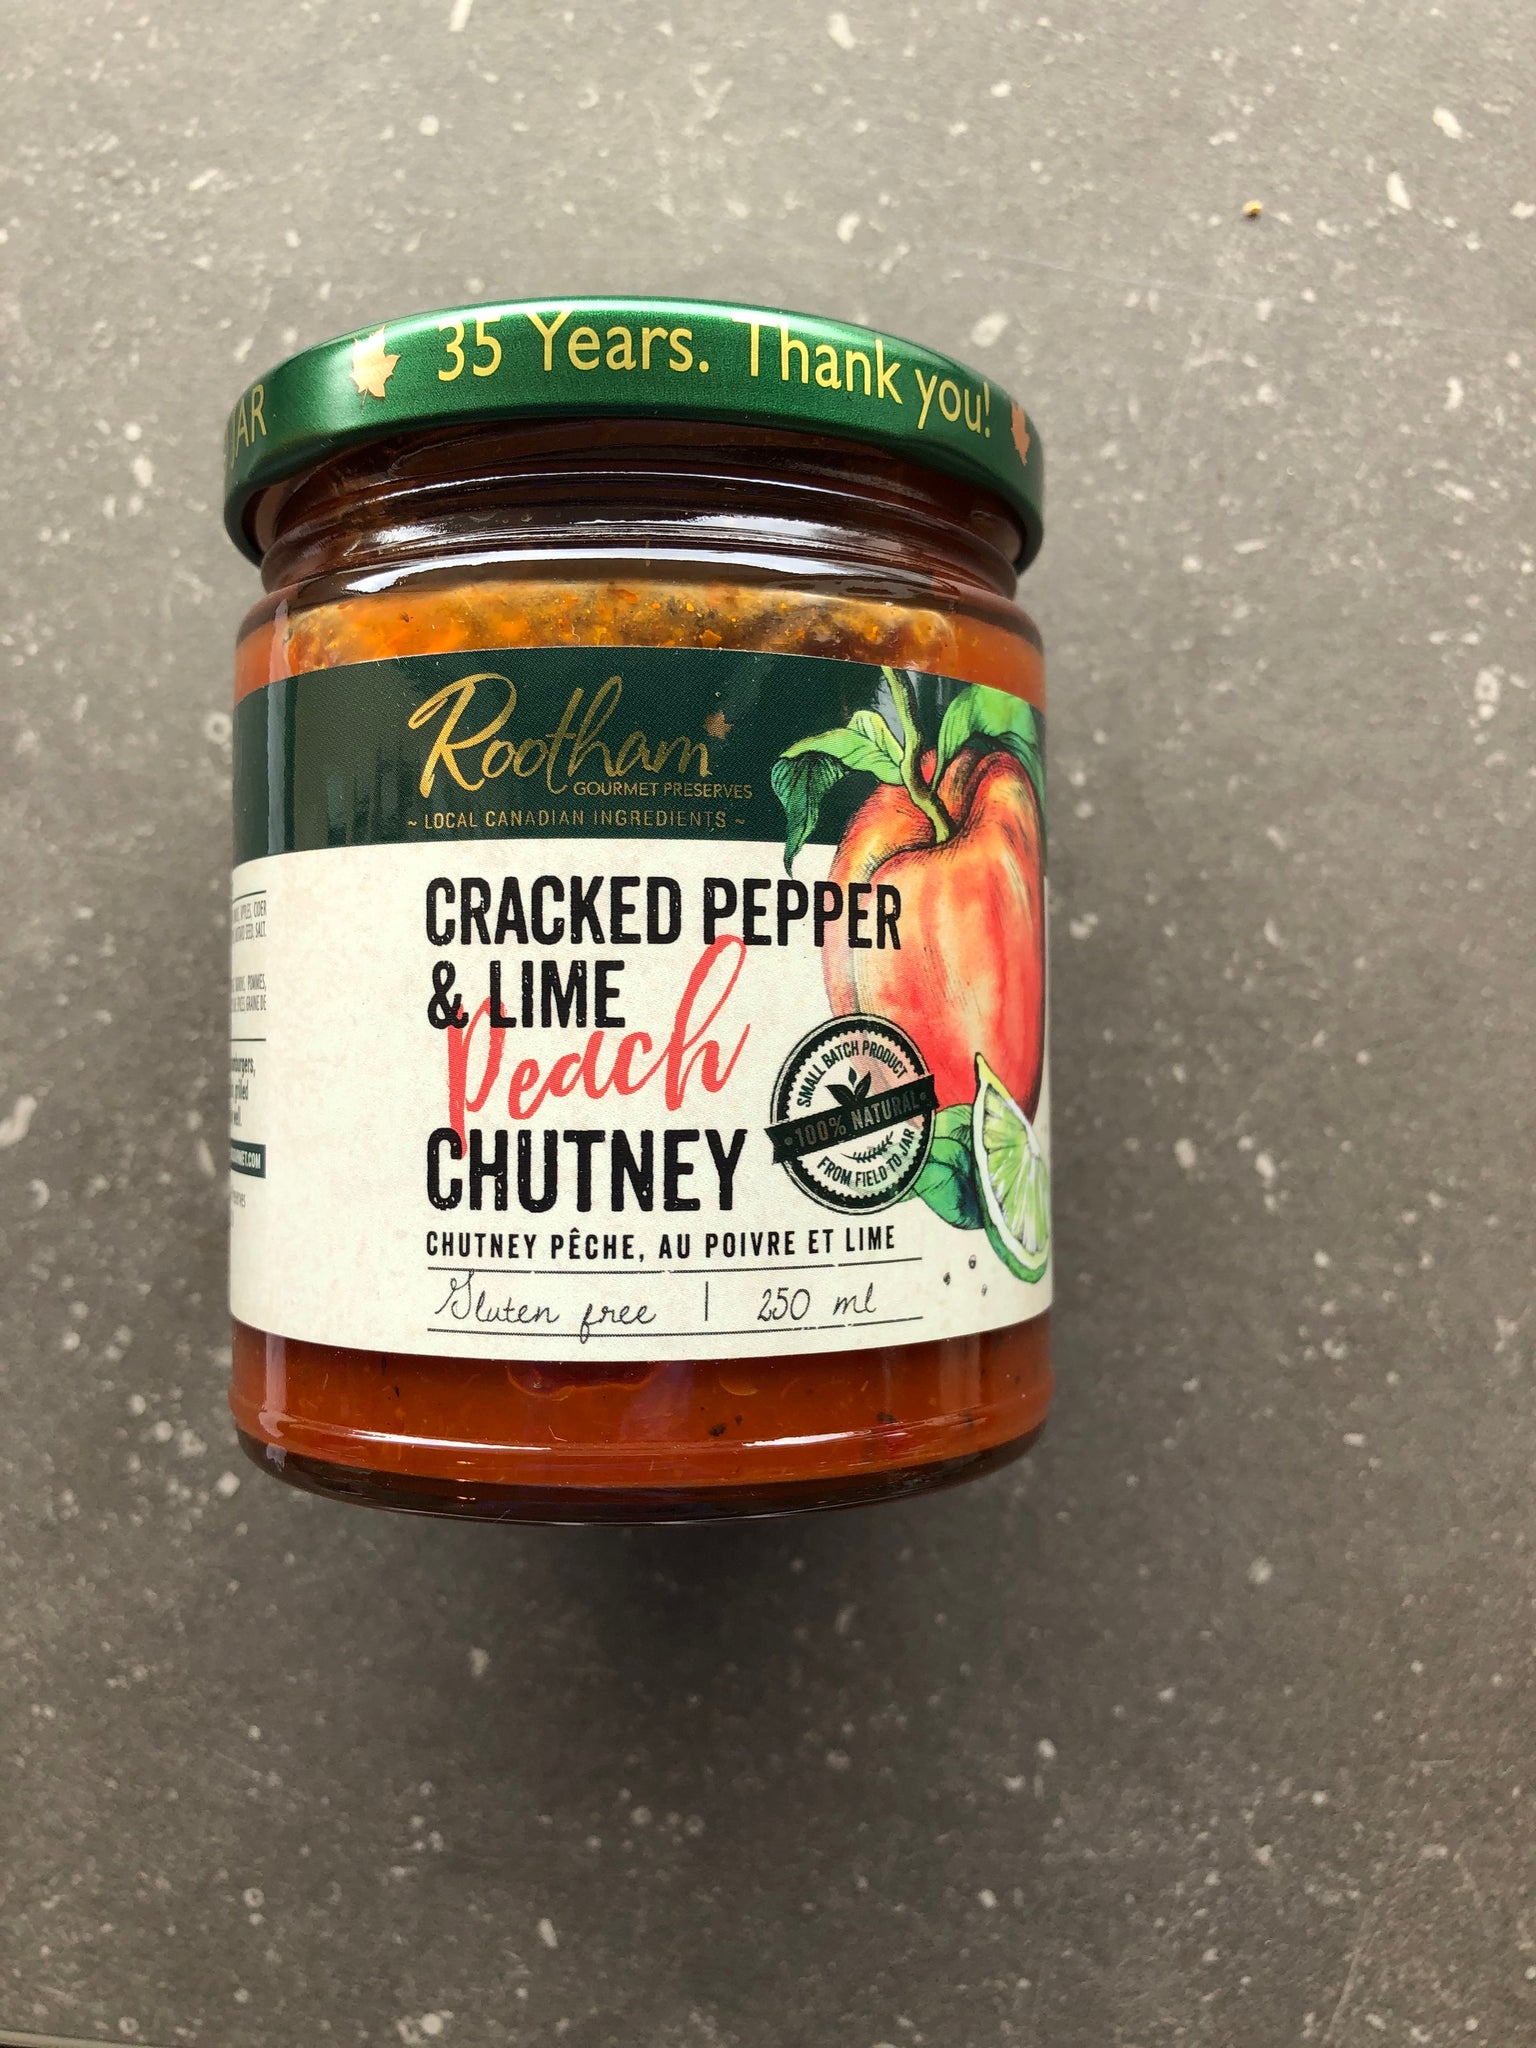 Rootham Chutney - Cracked Pepper, Lime, and Peach